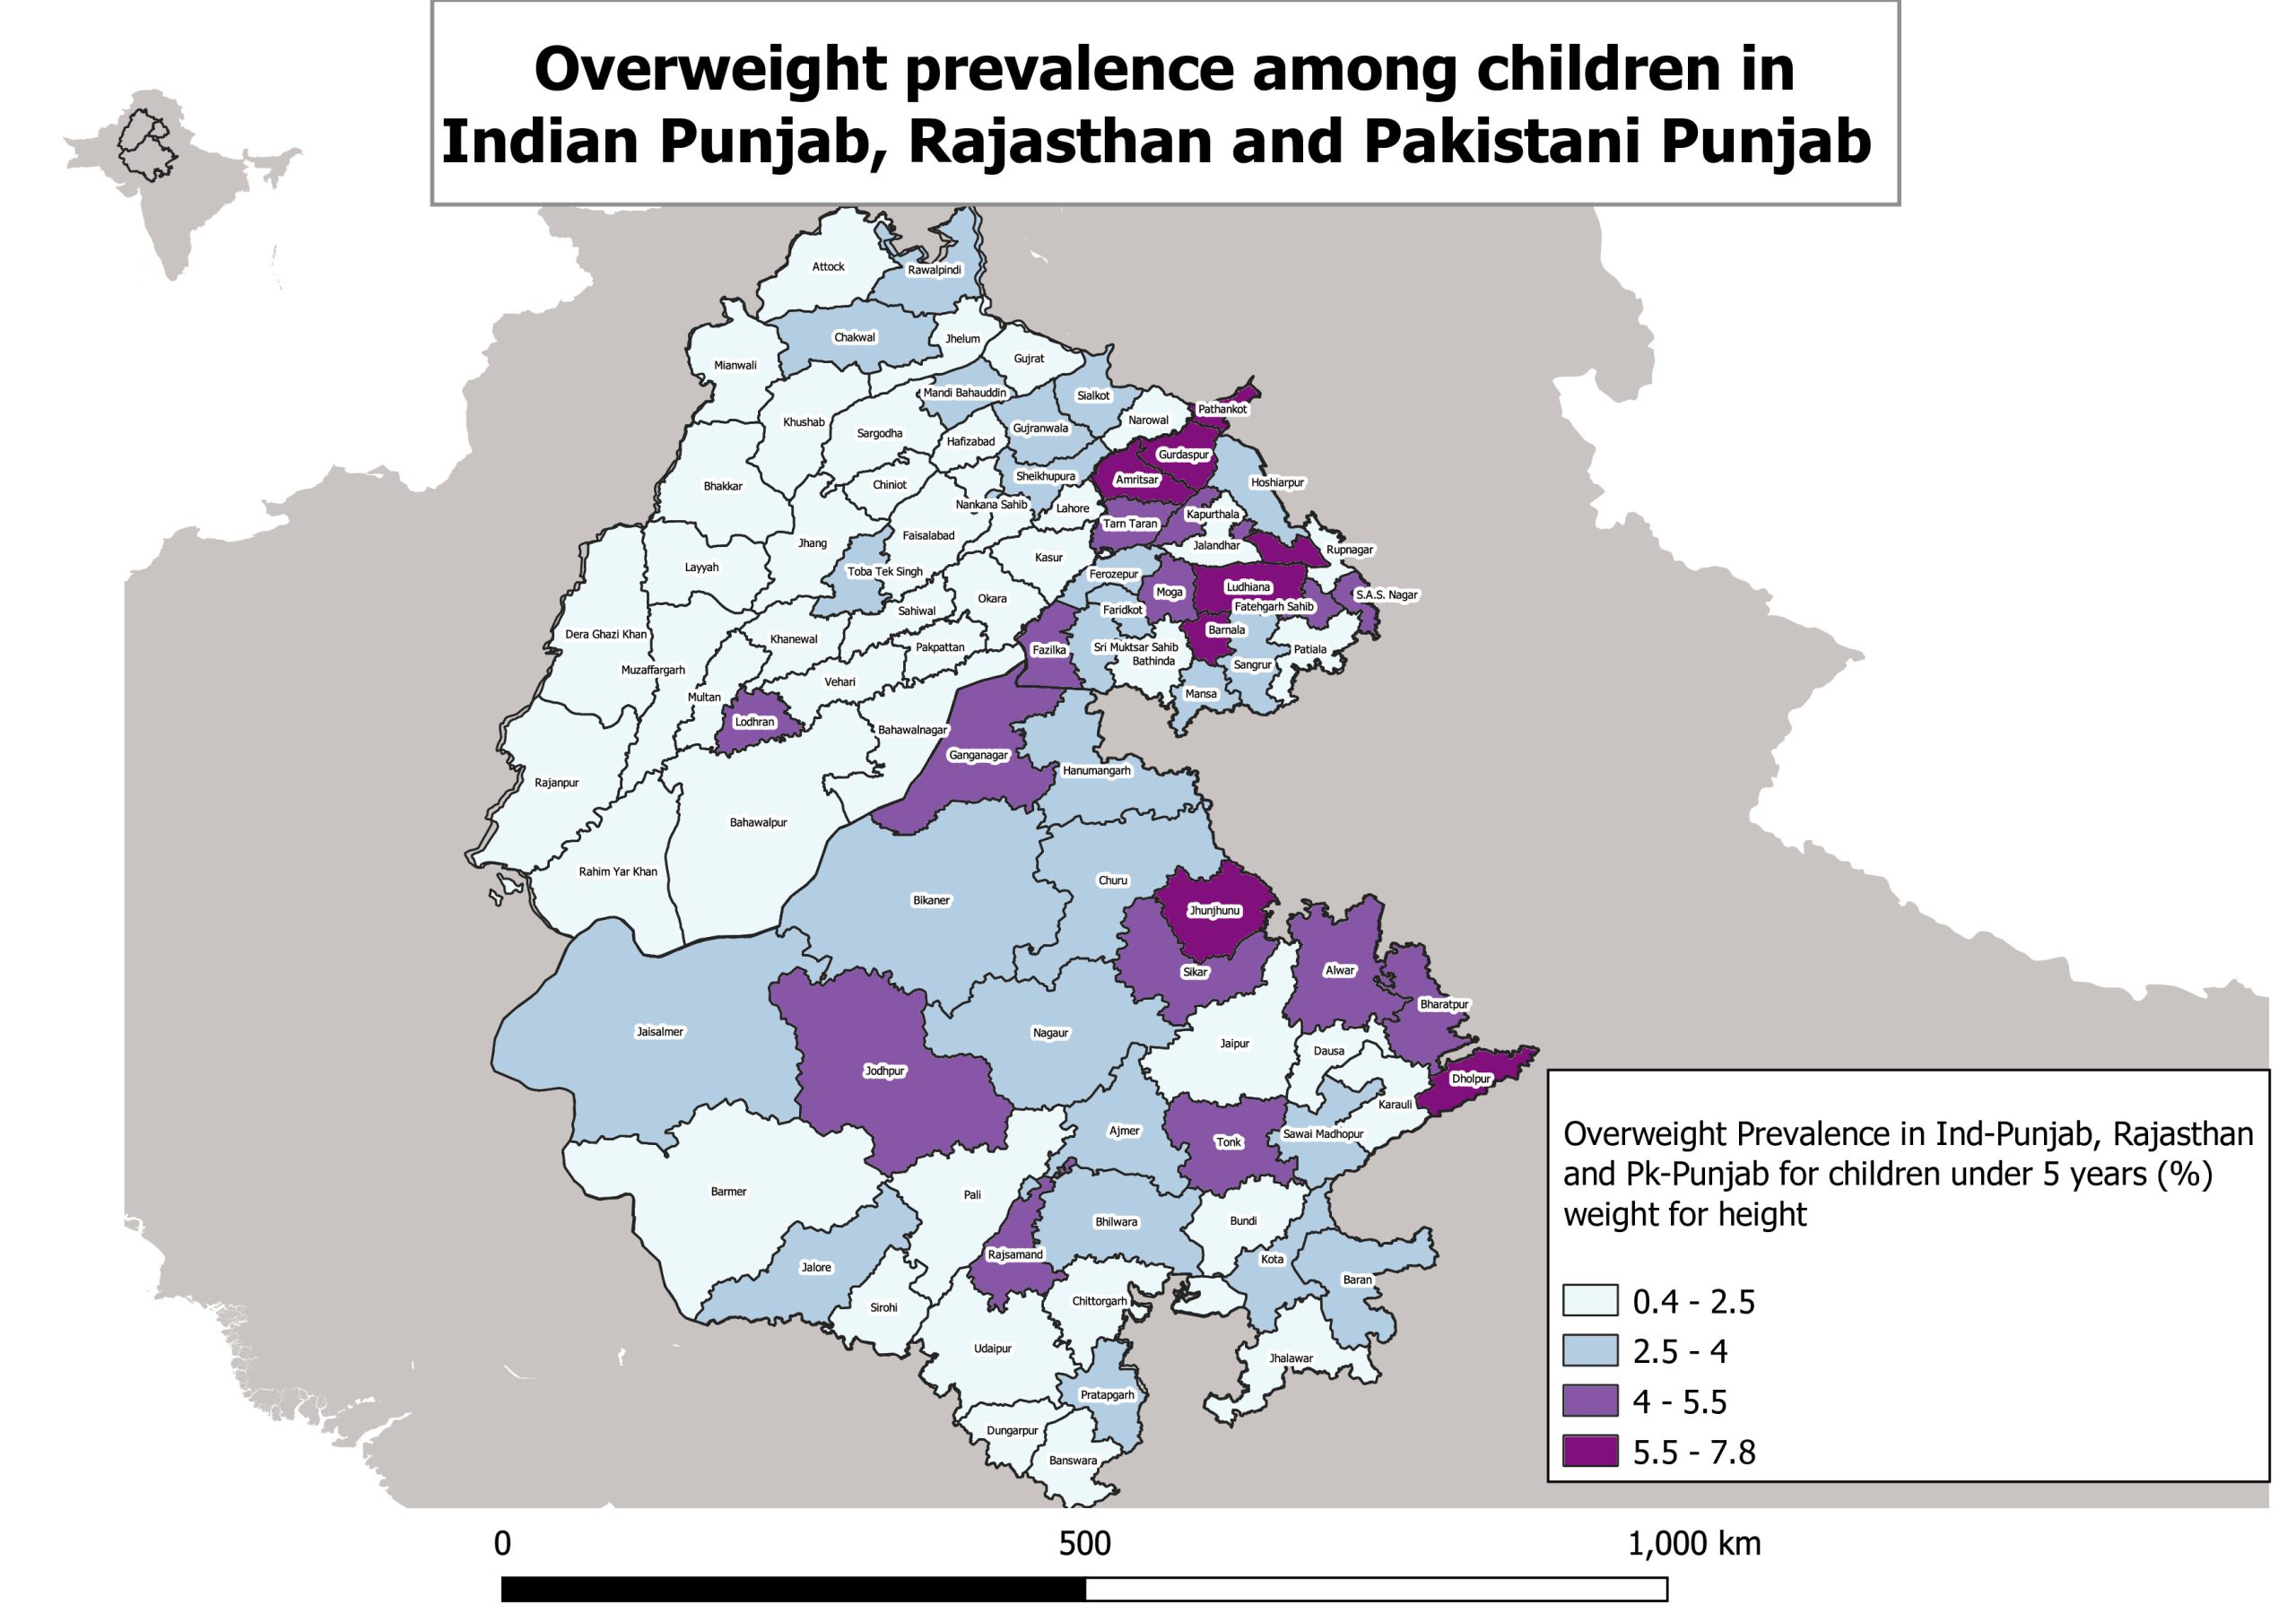 Map showing the prevalence of overweight among children in Indian Punjab, Rajasthan, and Pakistani Punjab